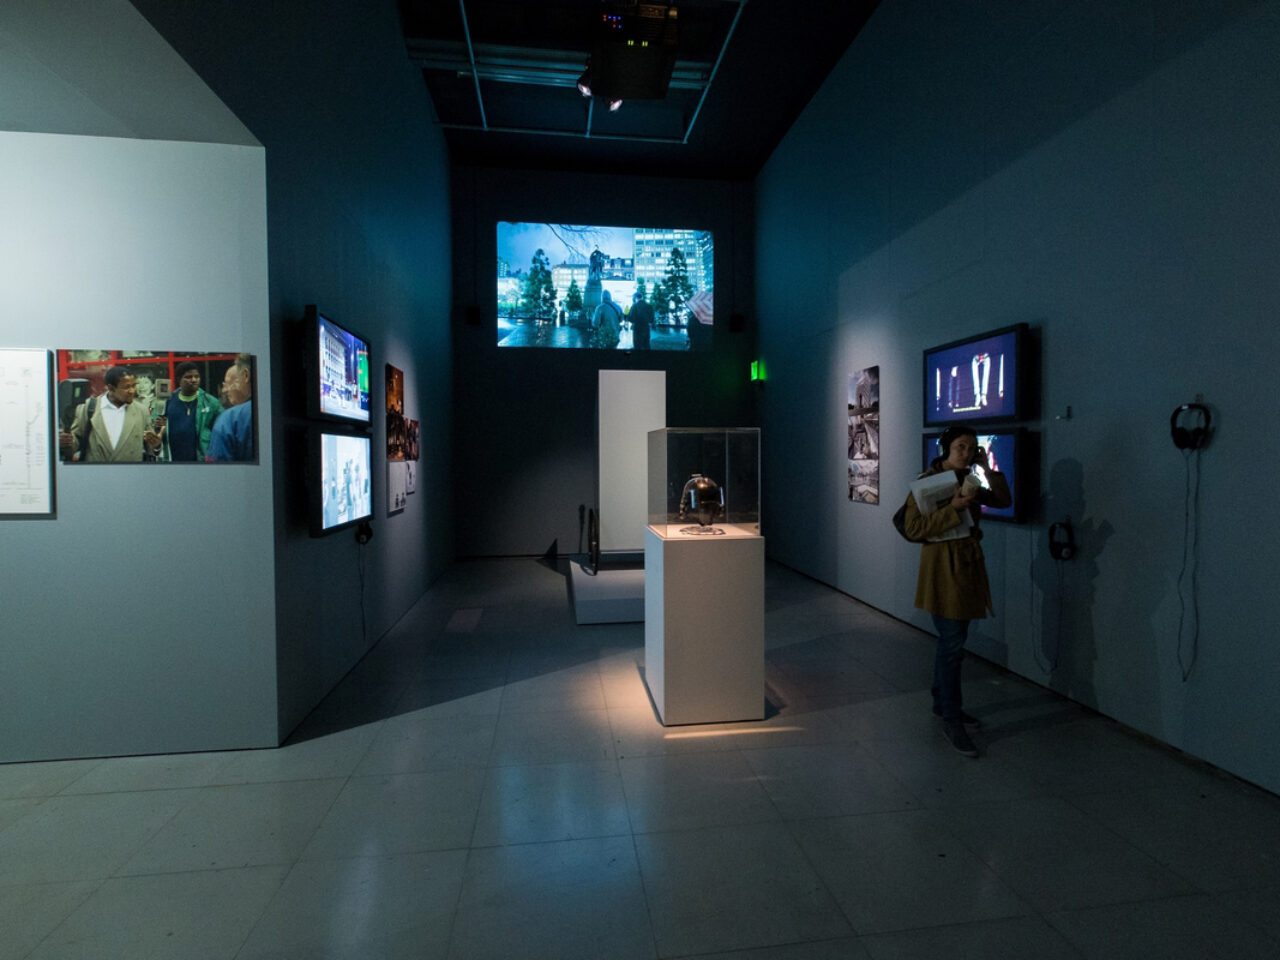 A room installation of artworks, there are four screens, one projection, mounted photographs and graphs and objects on platforms in the middle of the space.